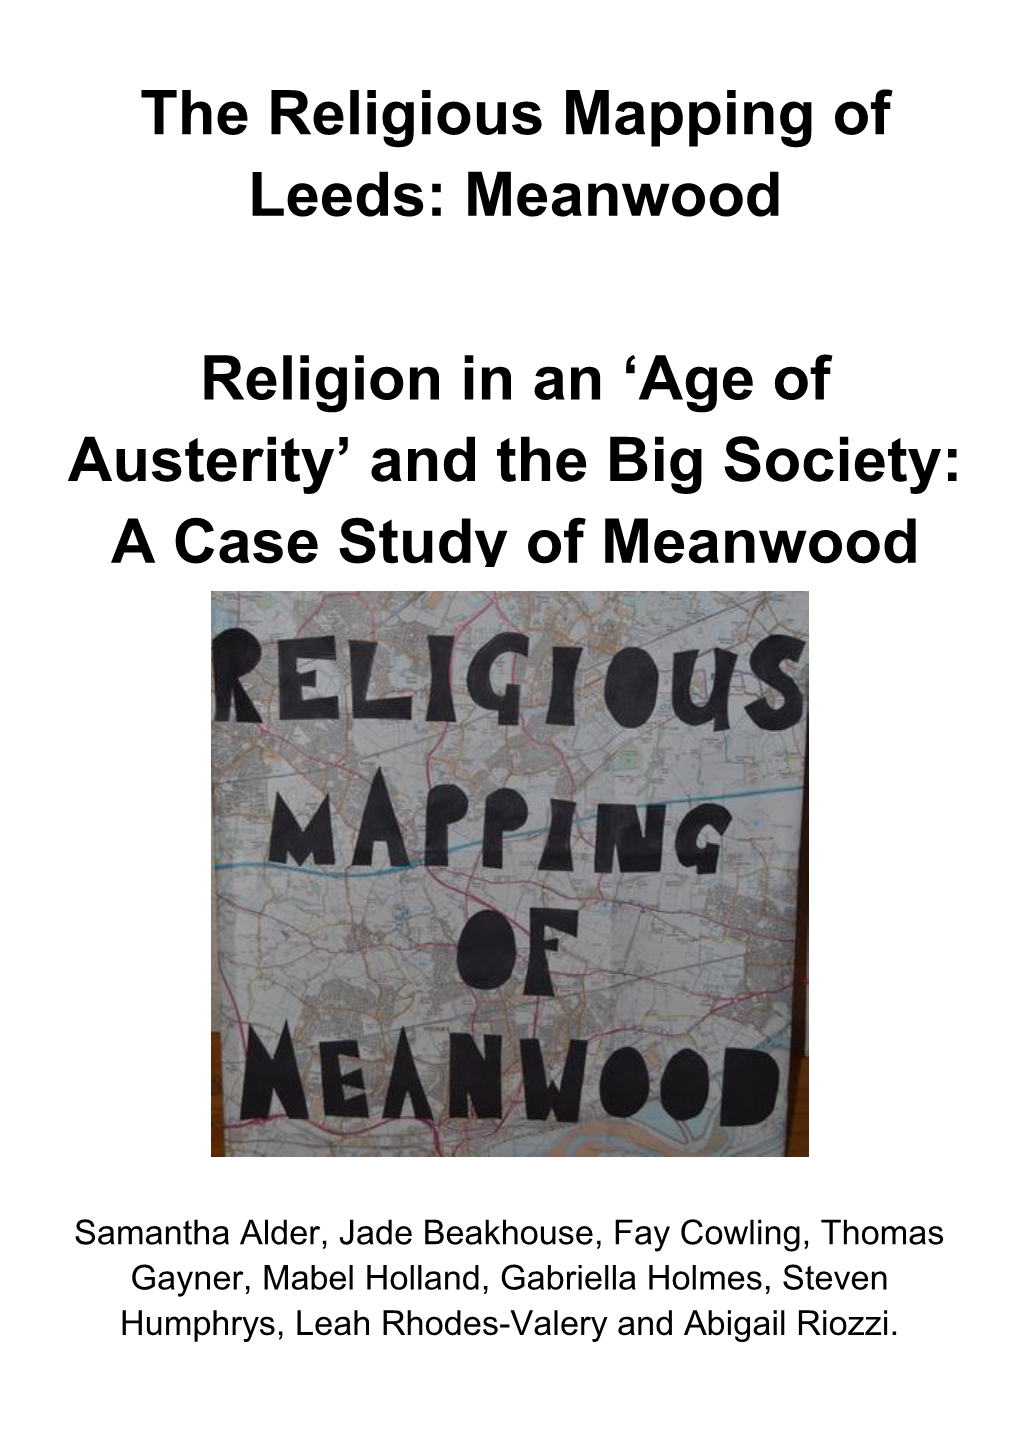 The Religious Mapping of Leeds: Meanwood the Religious Mapping of Leeds: Meanwood